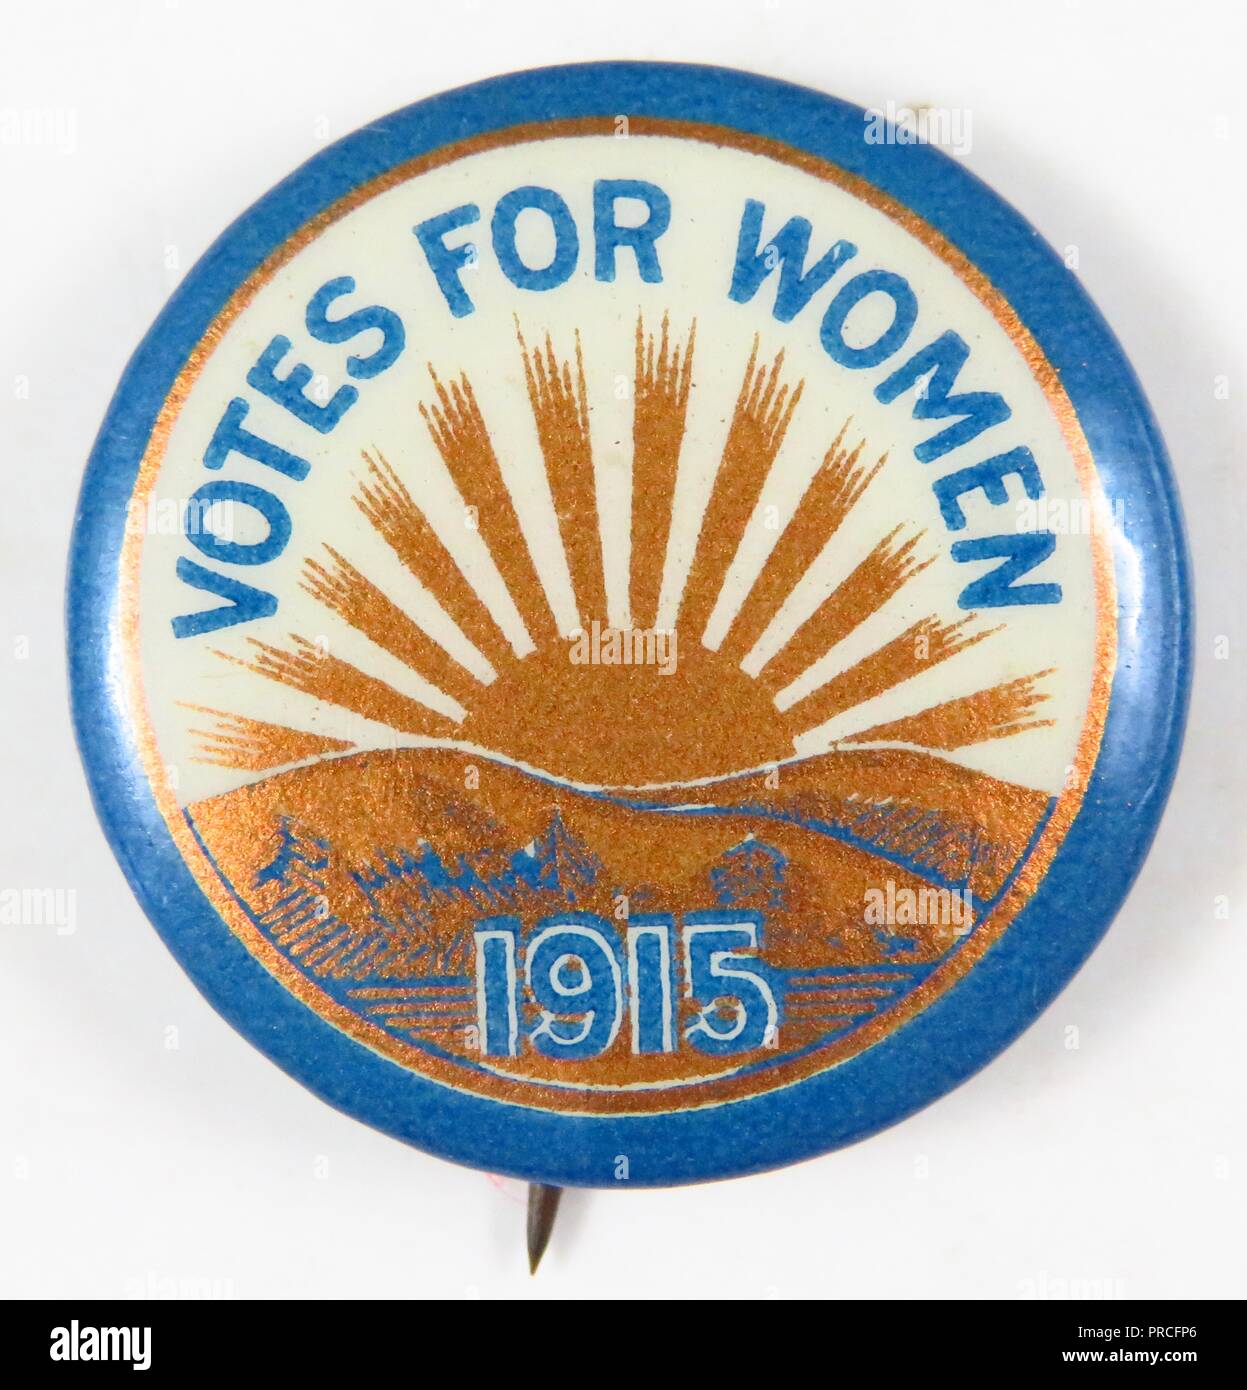 Orange and blue suffrage pin, designed using the unofficial colors of New York State, with an image of the sun rising over rolling hills, and the text aVotes for Women 1915, manufactured for the American market, to promote the contemporaneous Empire State Campaign, 1915. Photography by Emilia van Beugen. () Stock Photo